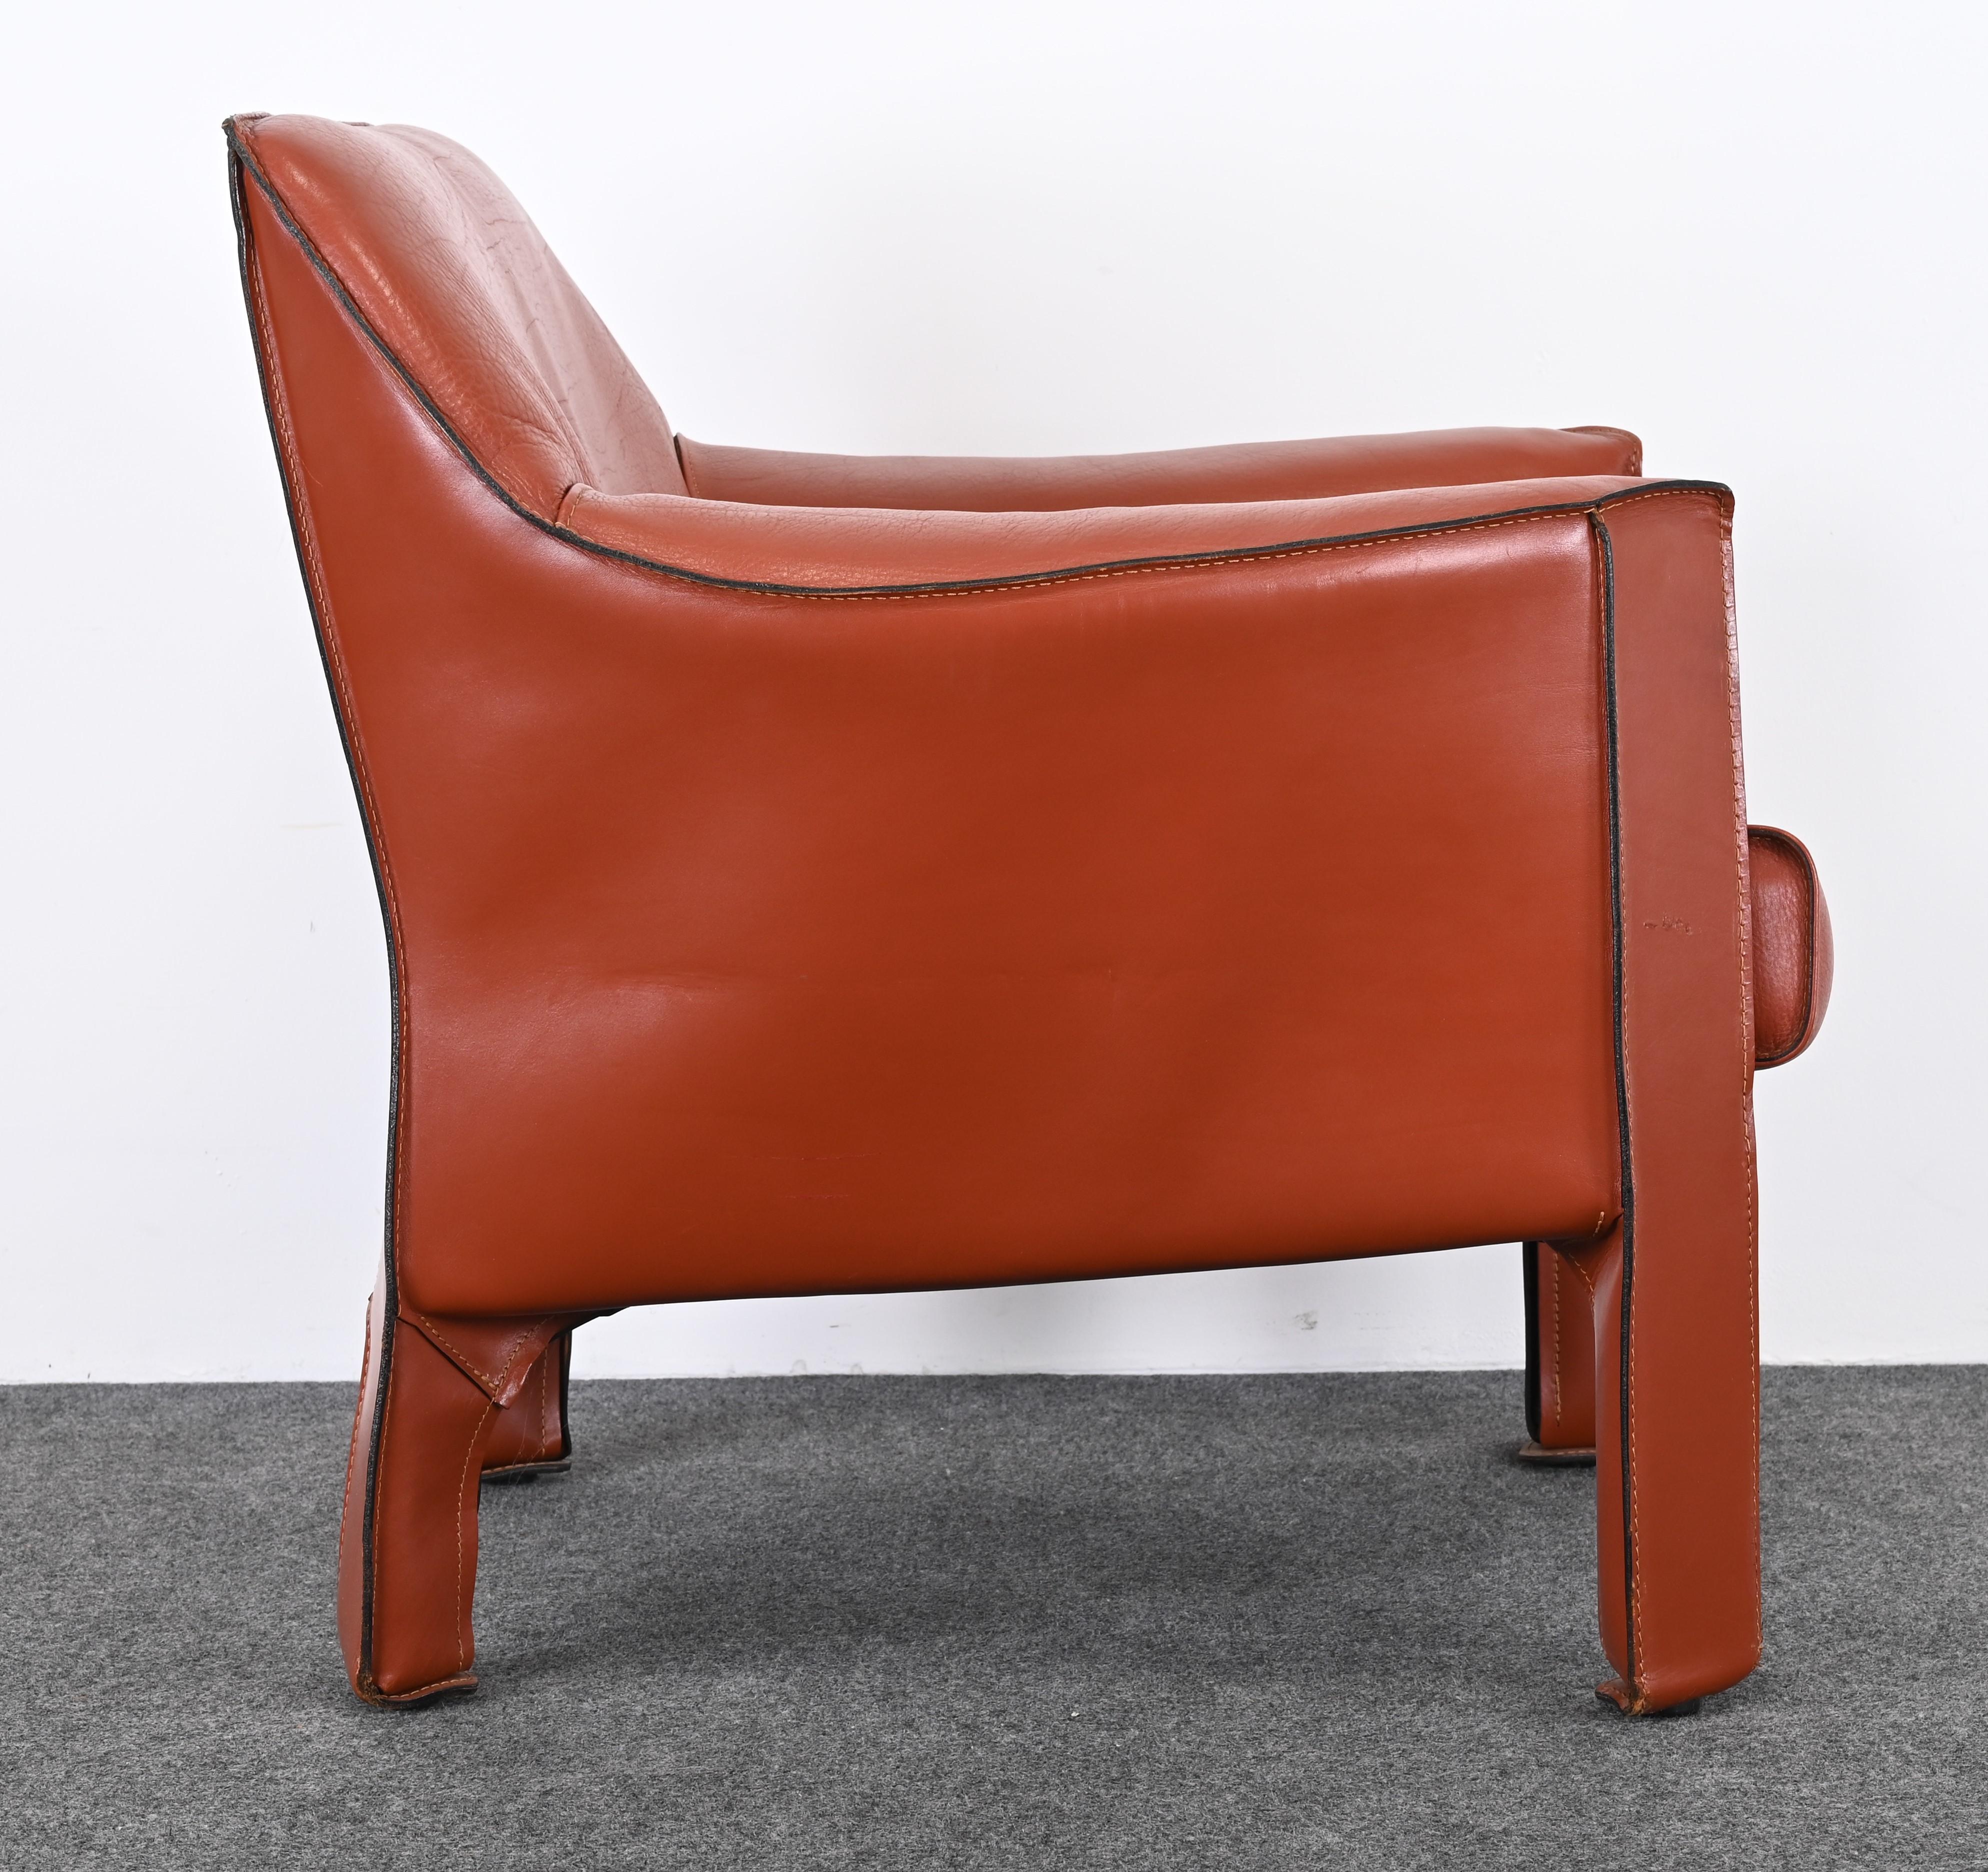 Leather Cassina Cab Chair 415 Designed by Mario Bellini, No Longer in Production